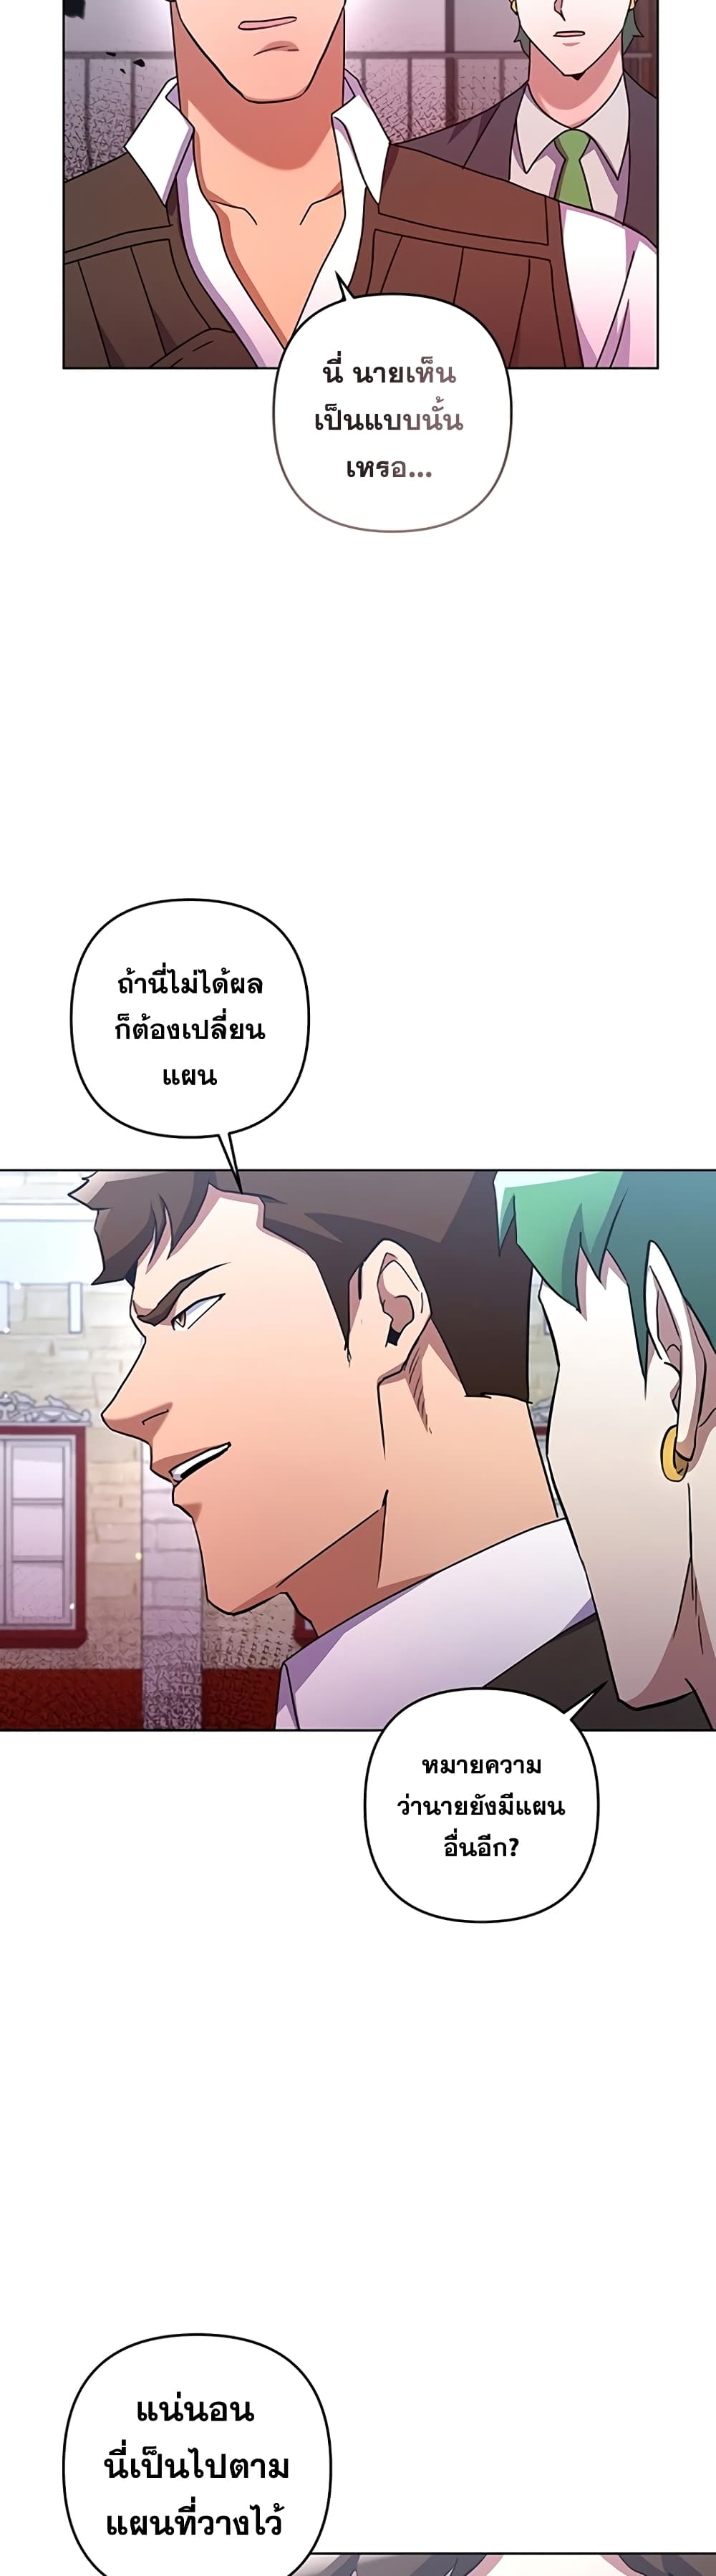 Surviving in an Action Manhwa ตอนที่ 23 (17)